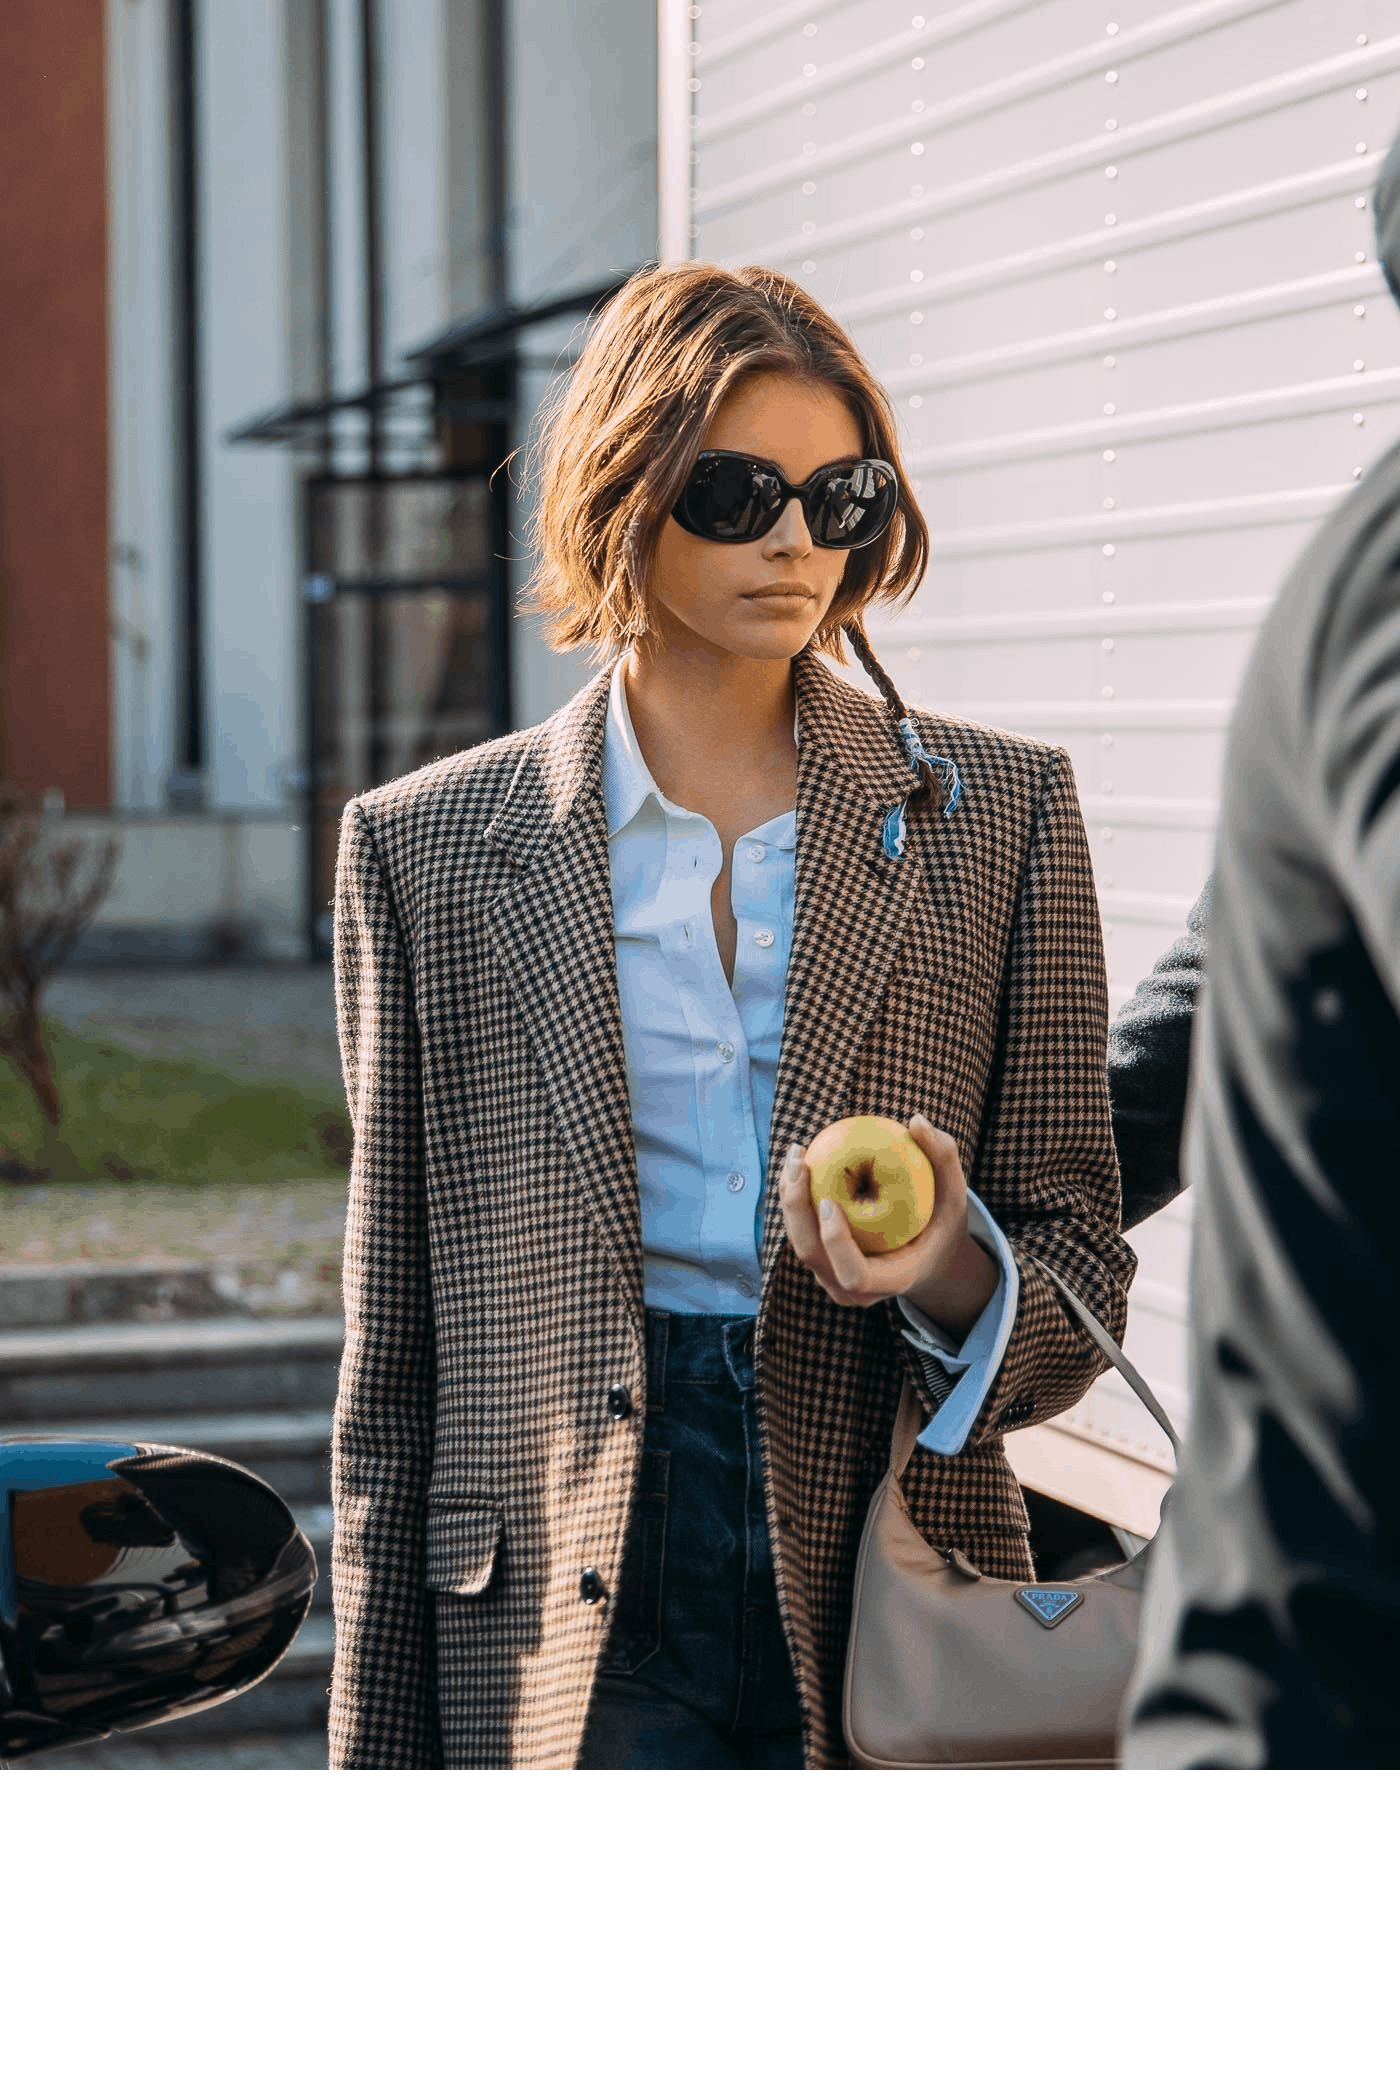 clothing apparel sunglasses accessories accessory suit overcoat coat person human